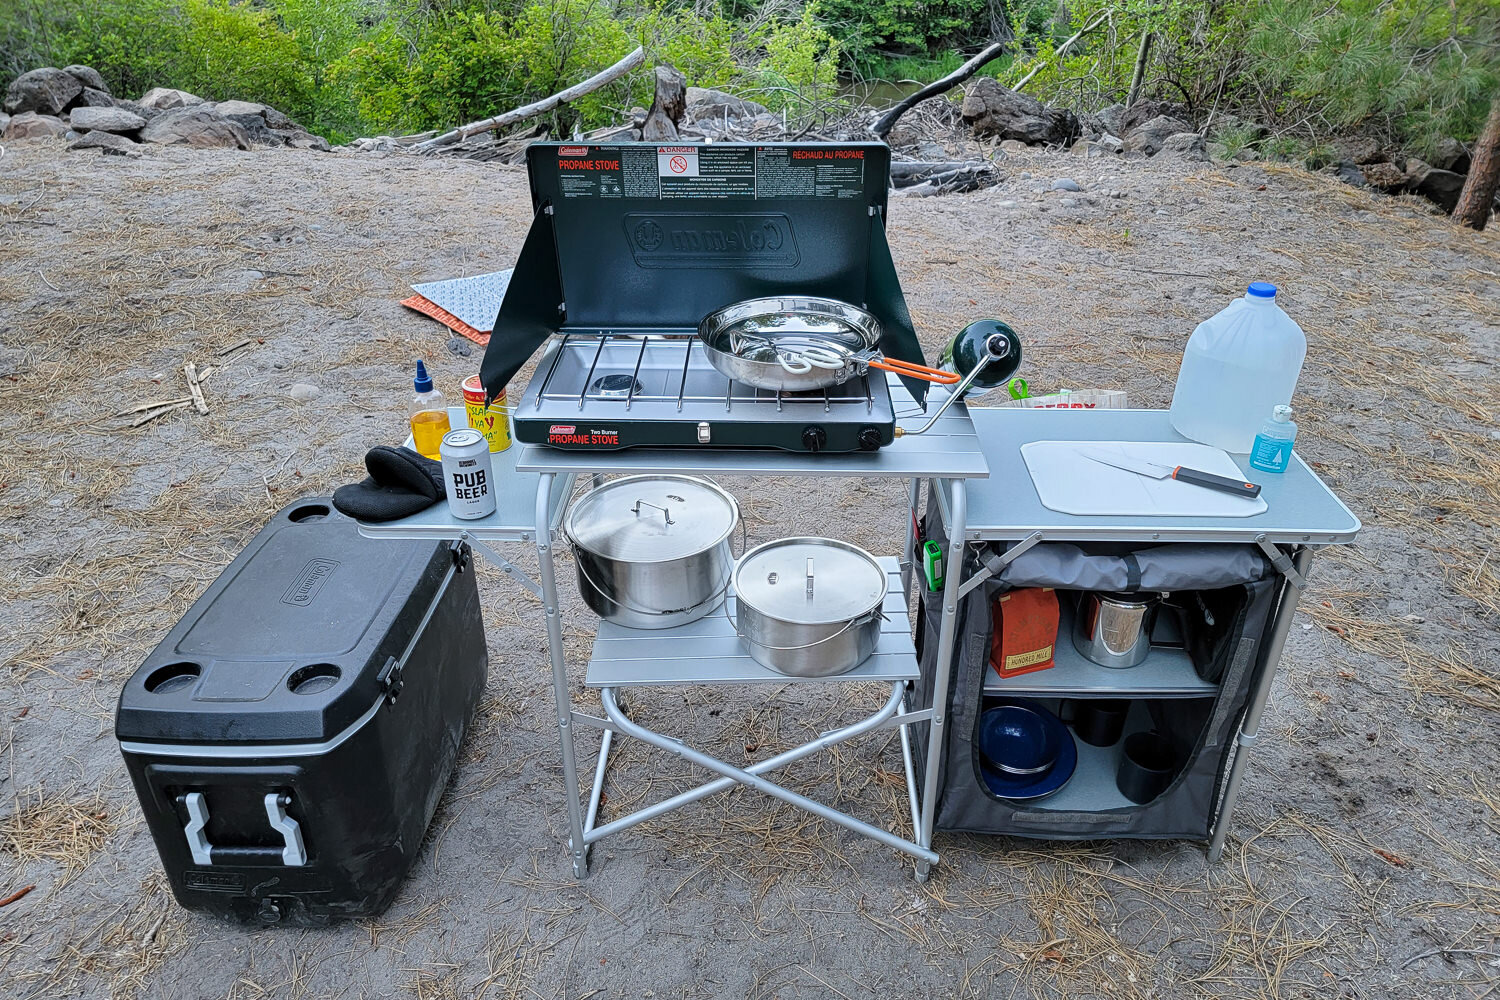 The GSI Outdoor Troop Cookset has a large capacity for cooking & boiling water for hungry groups